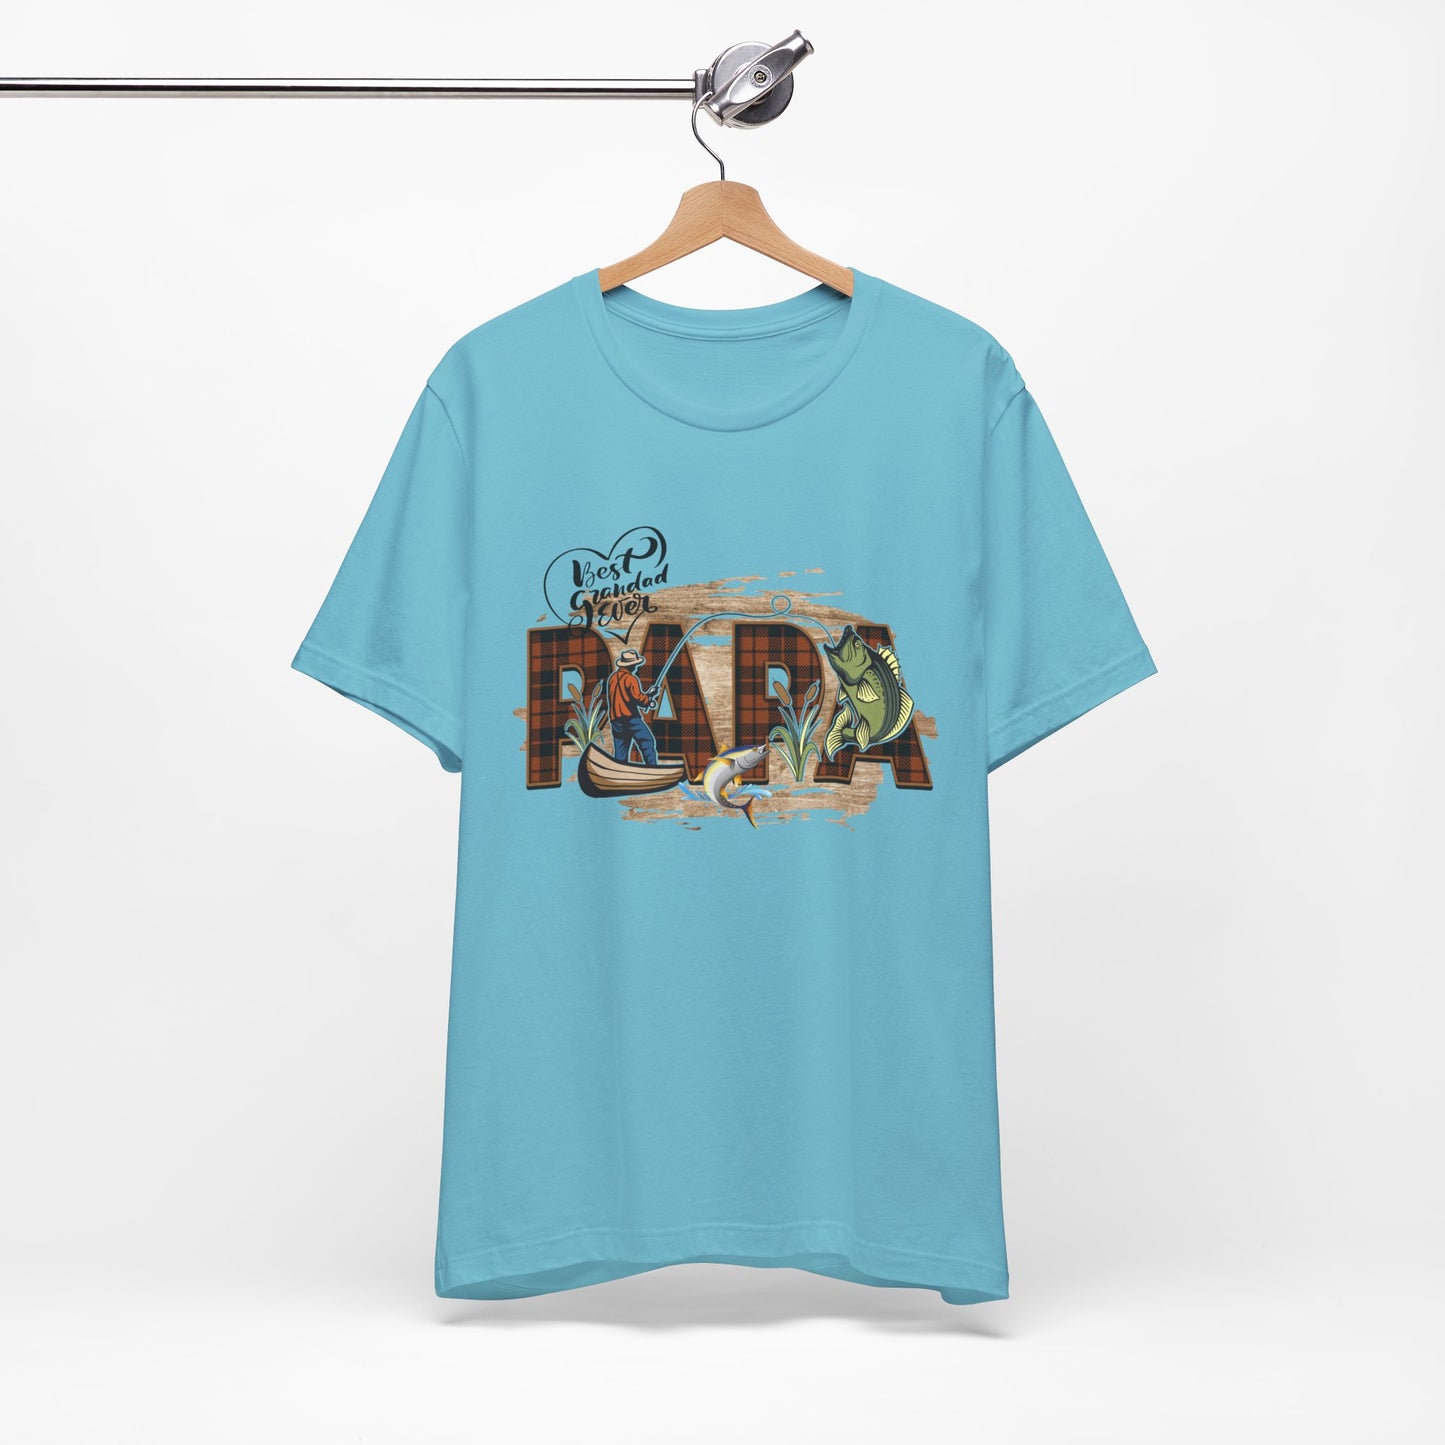 Happy Father's Day T-shirt For Papa, Papa's Shirt, Gift for Papa.